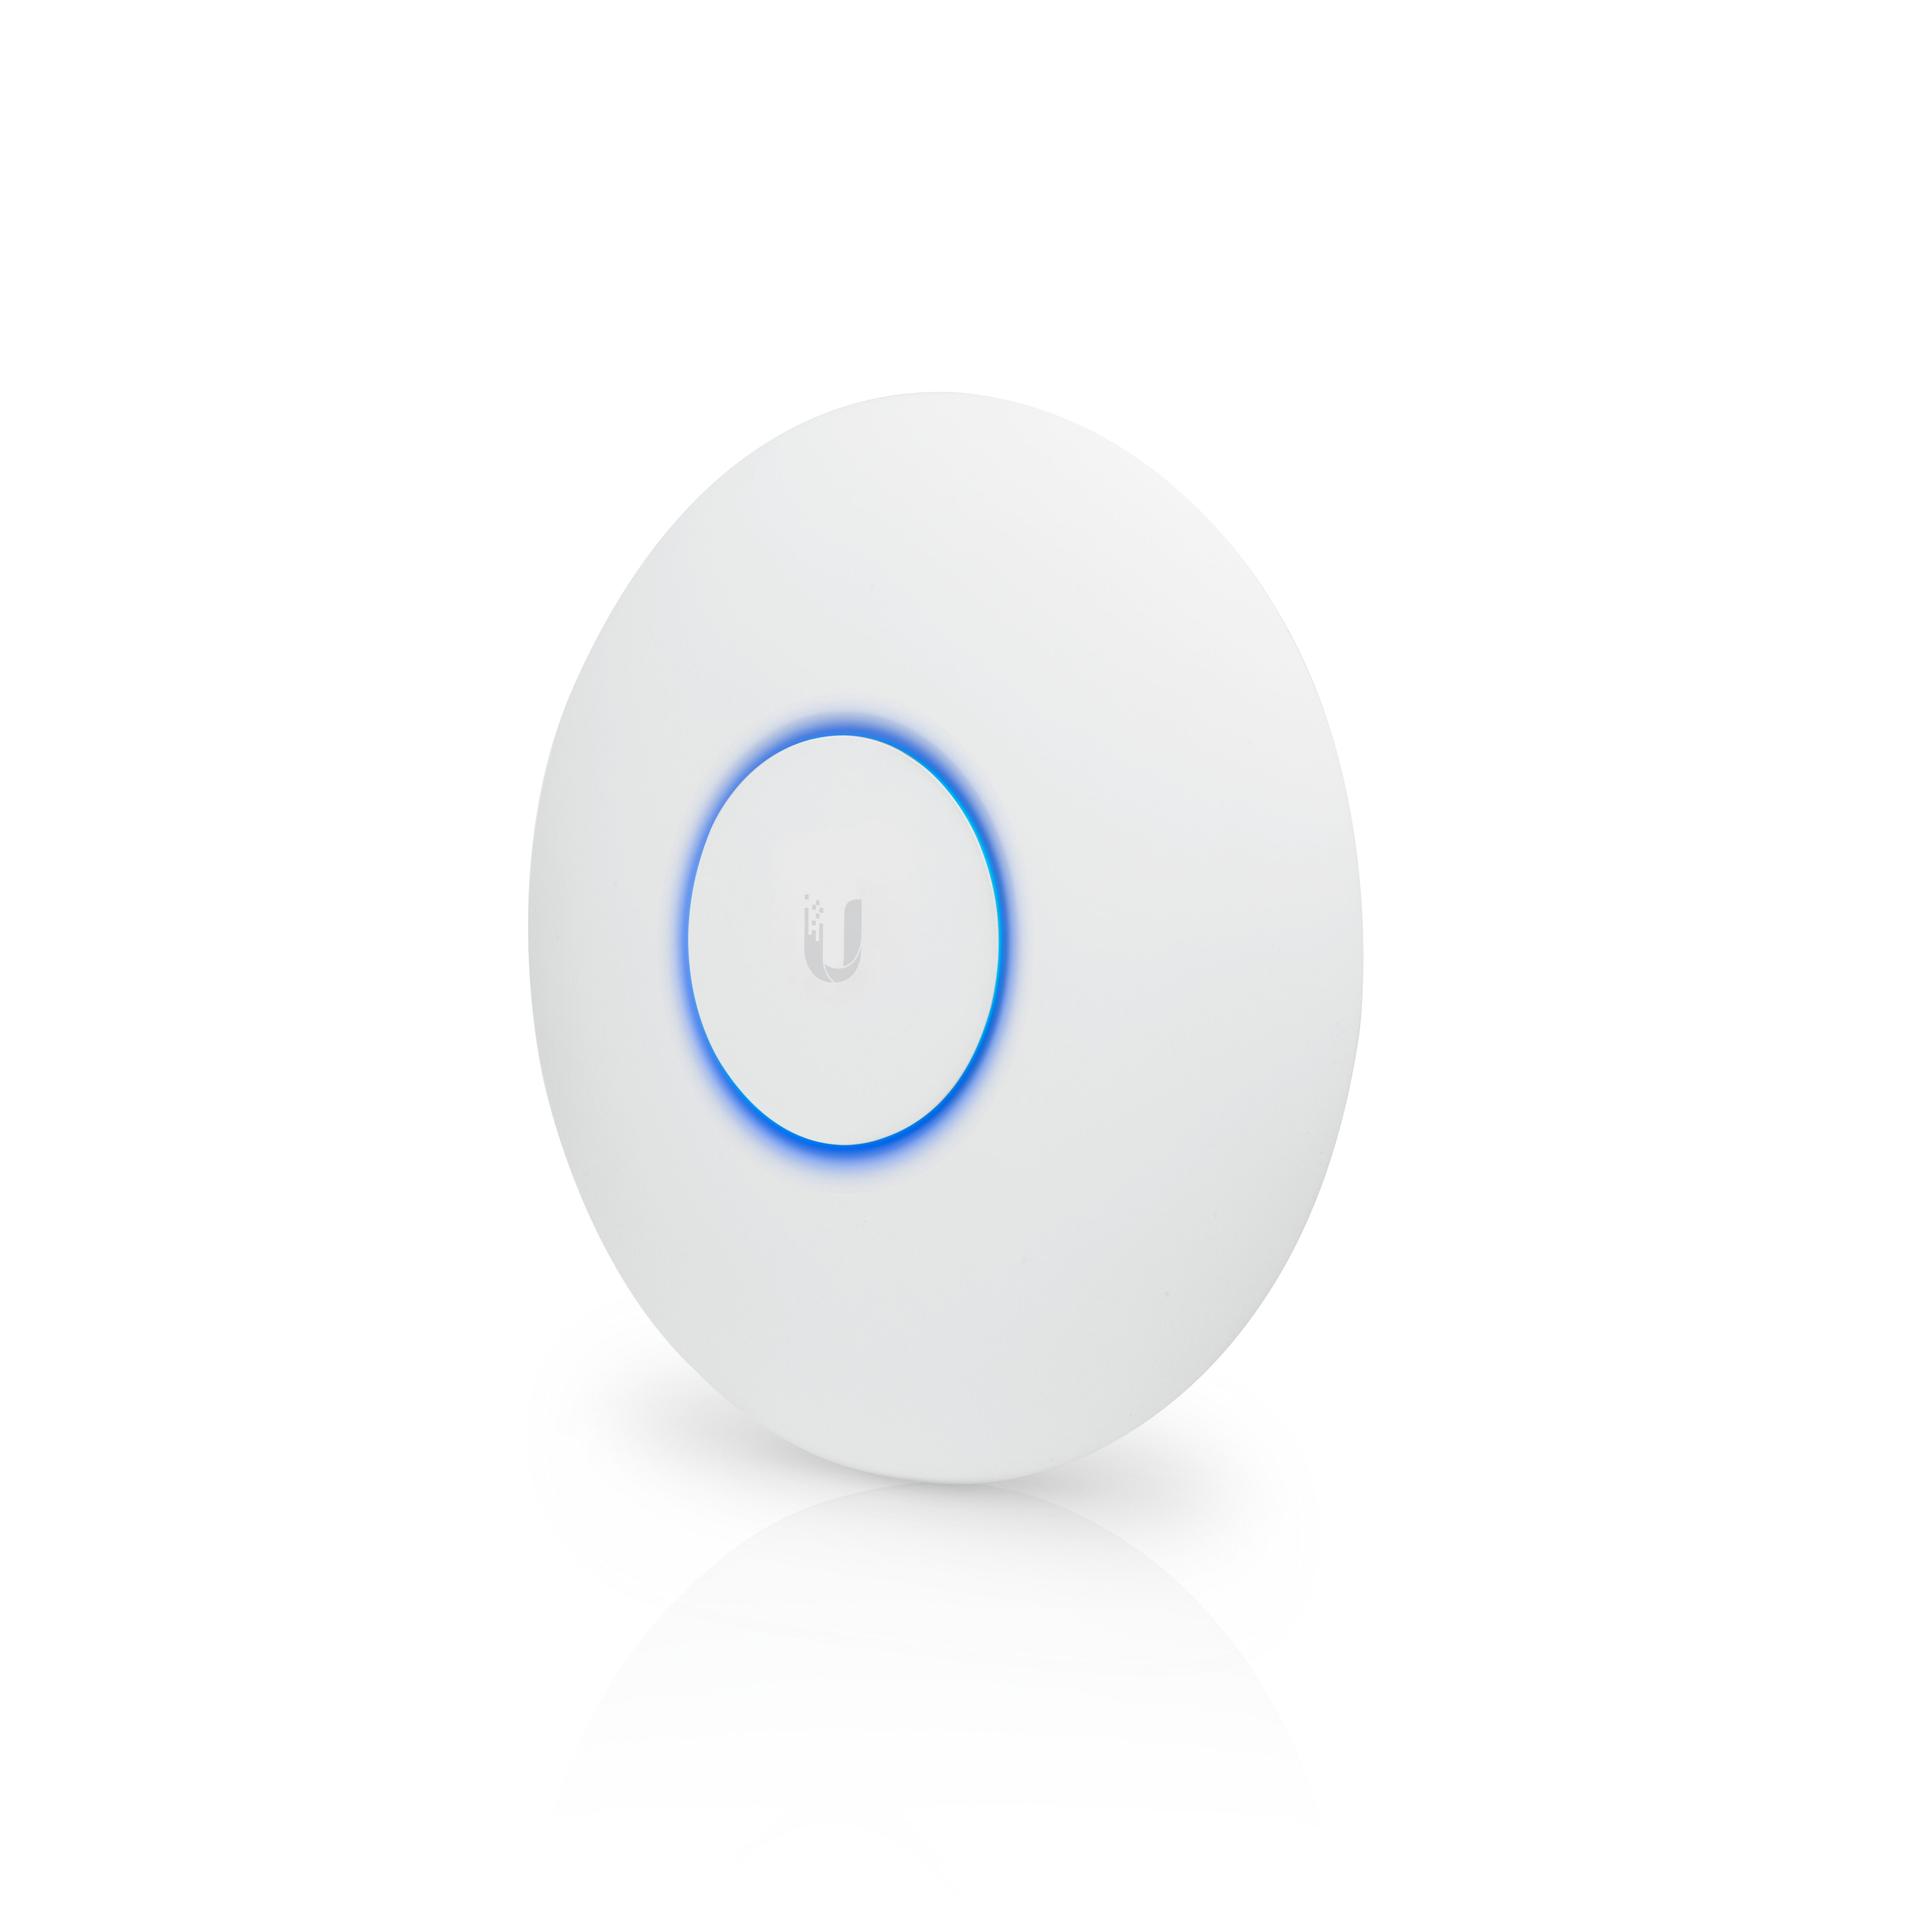 Ubiquiti UniFi UAP-AC-PRO WiFi 5 3x3 PoE Indoor/Outdoor Access Point Front Angle Image